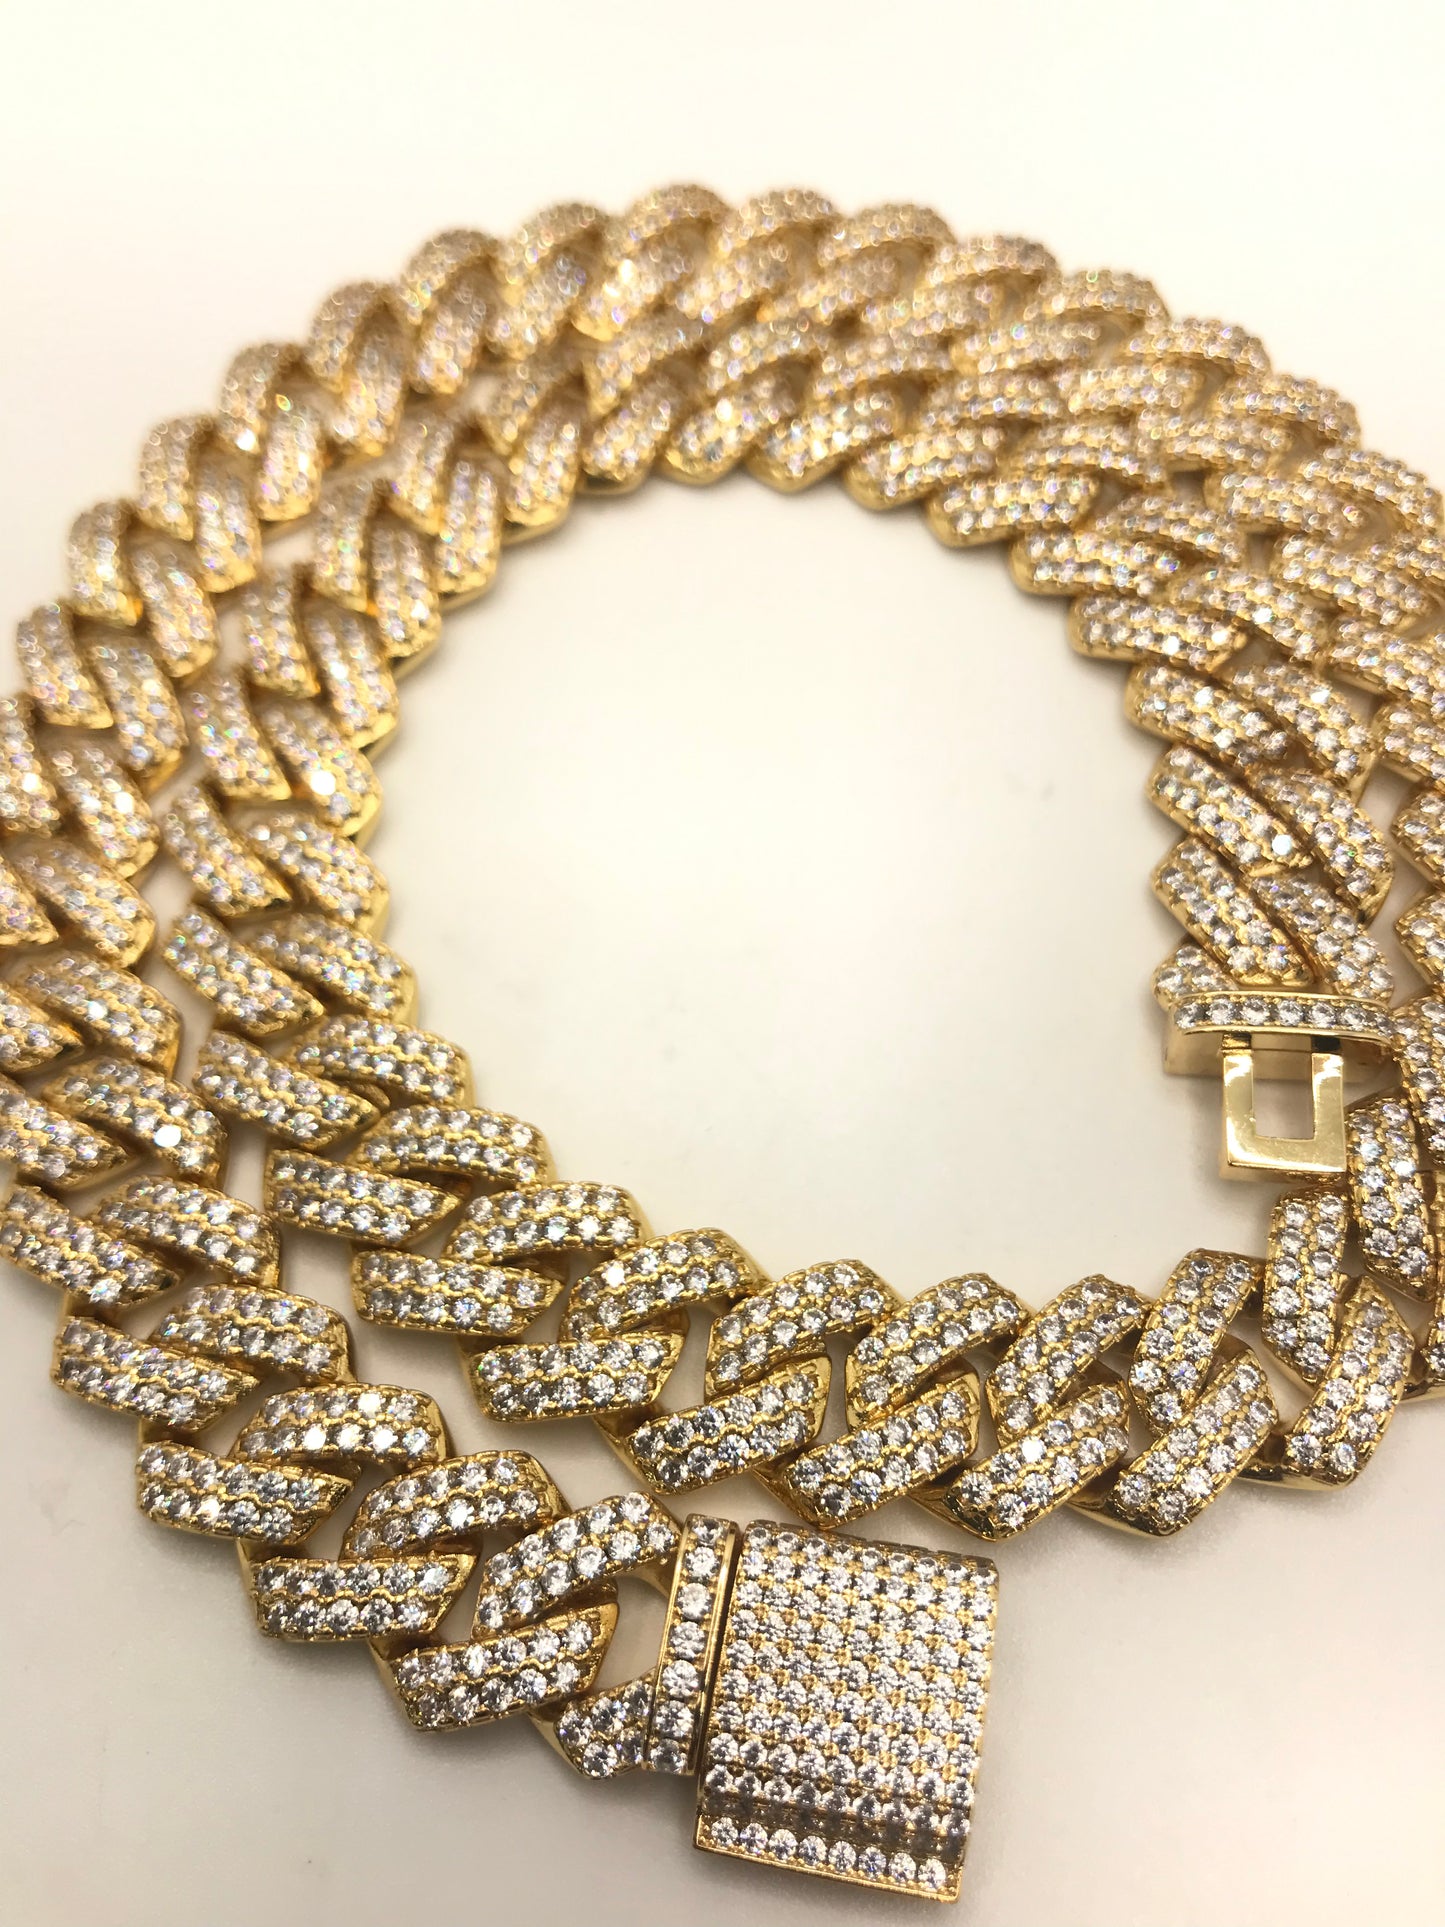 13mm cuban link iced out chain